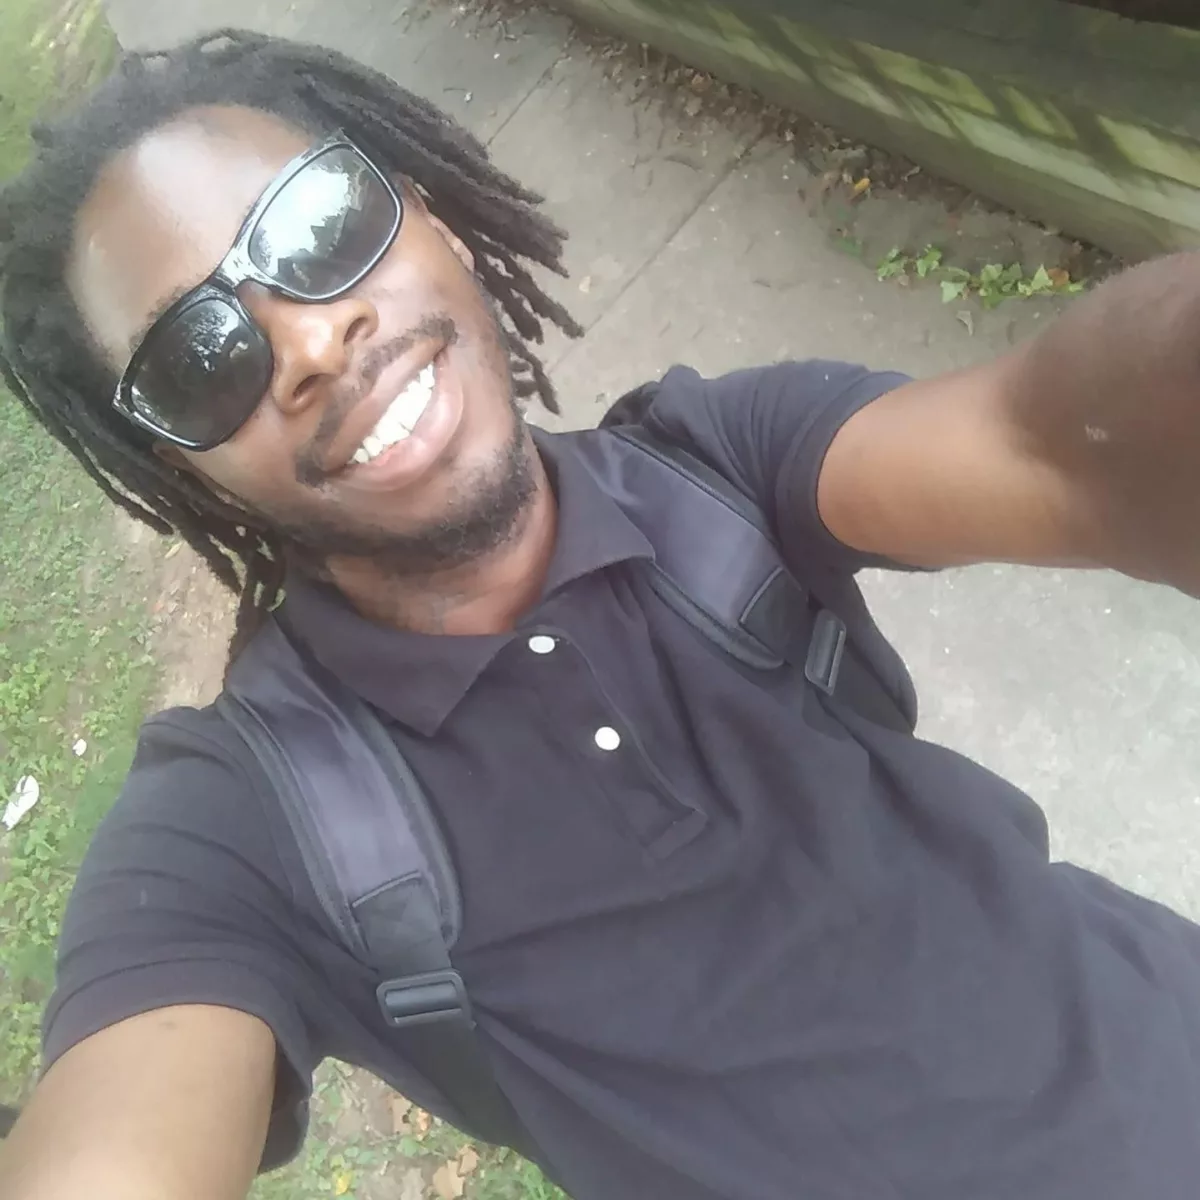 This photo shows Antonio Meanus taking a selfie. He is wearing black sunglasses and a black polo shirt.